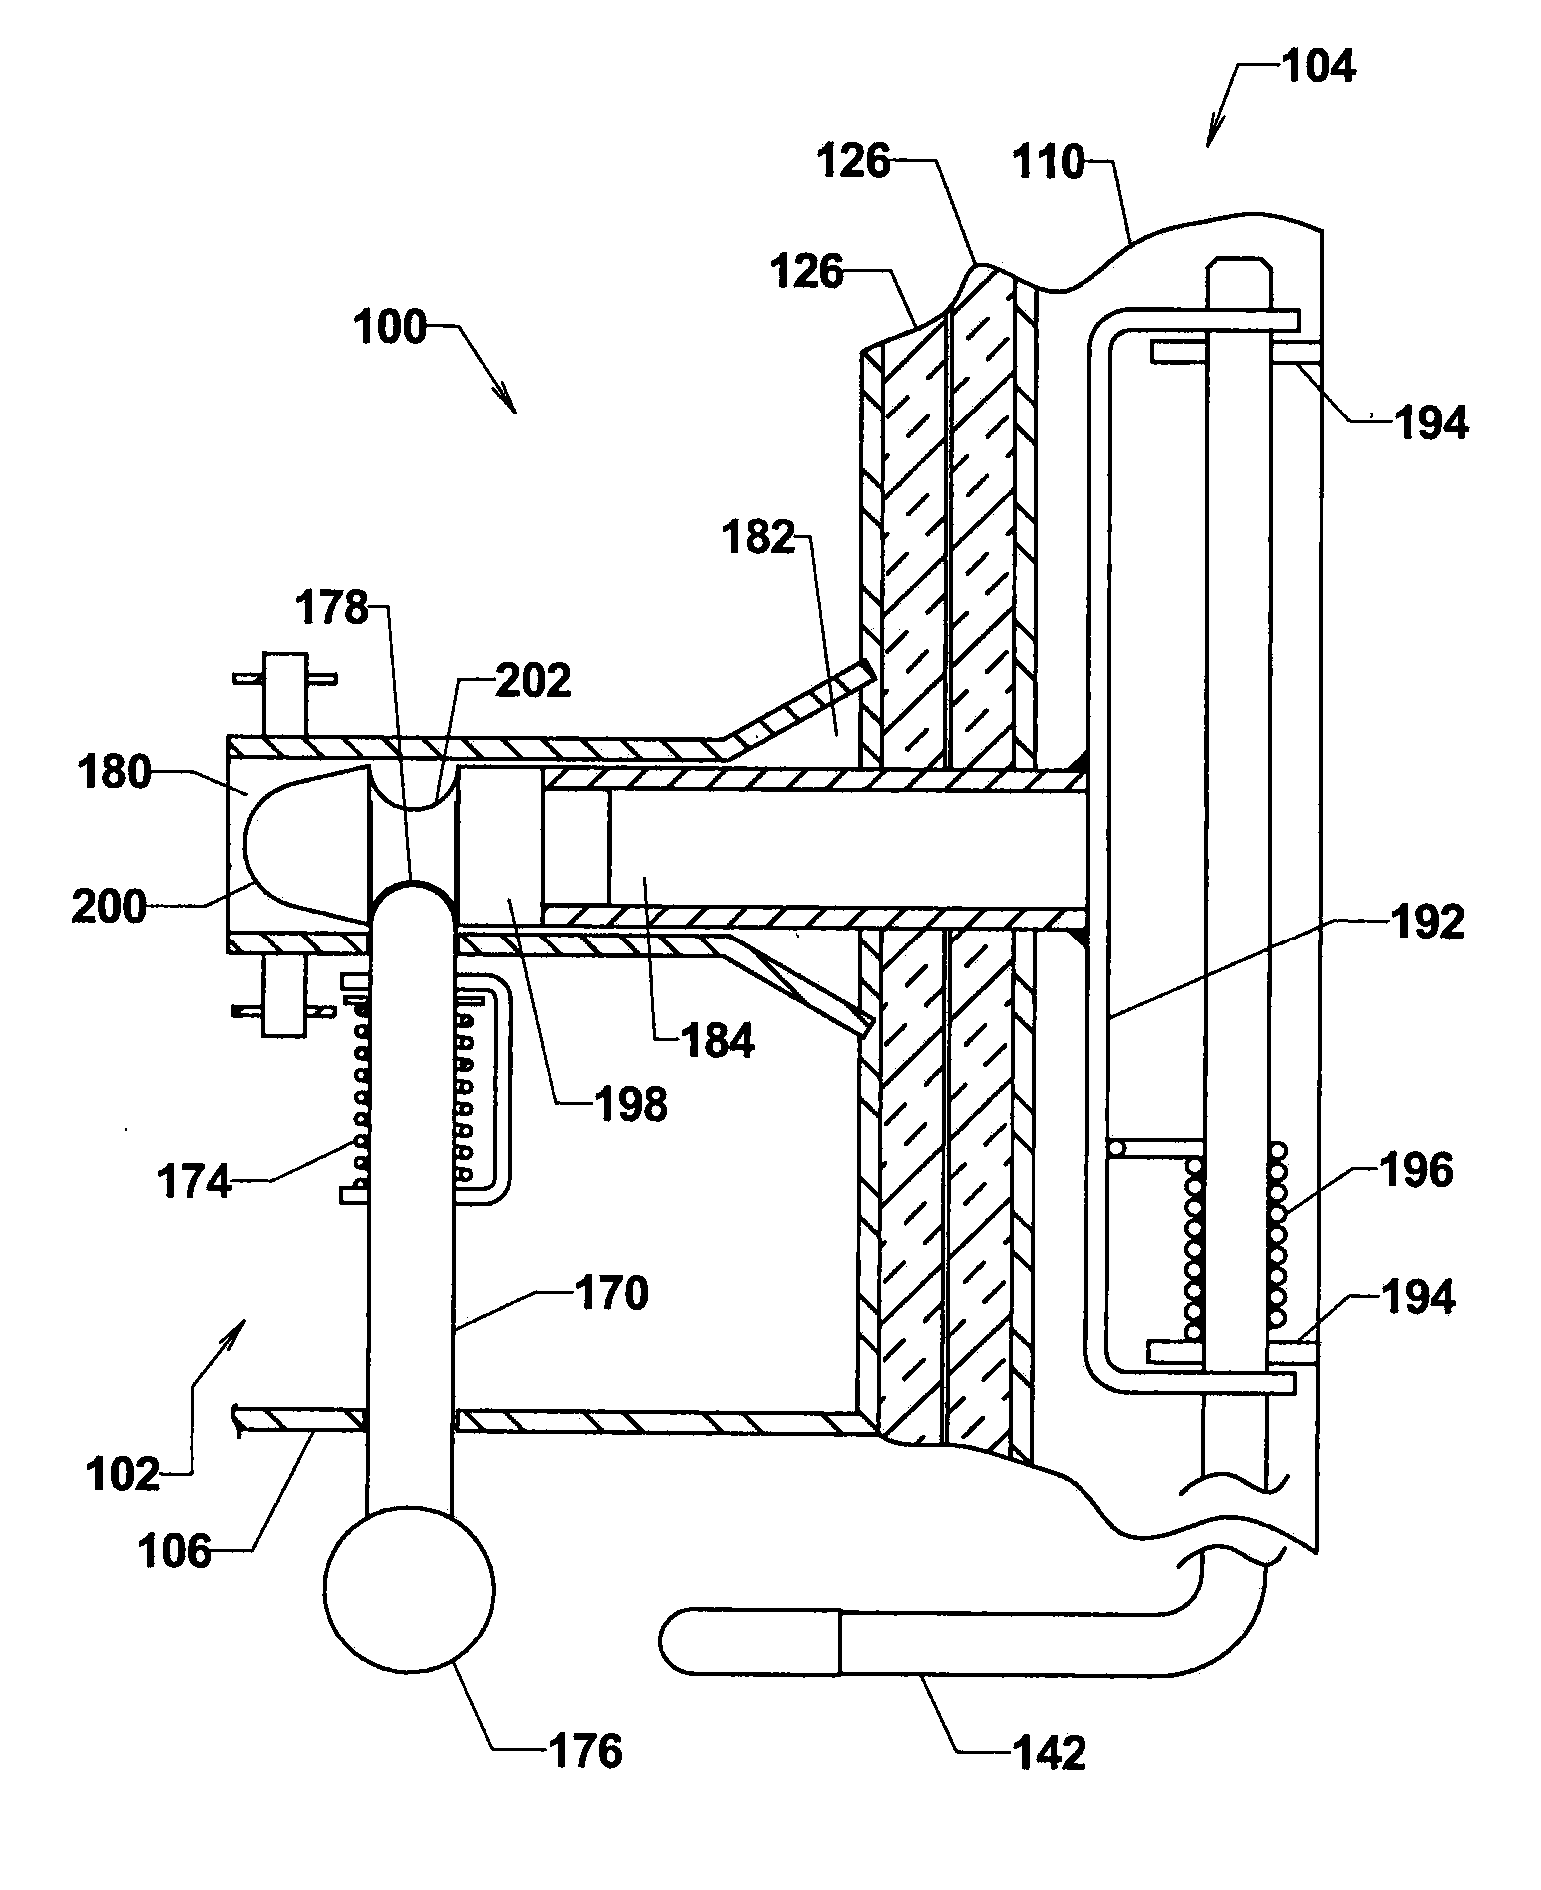 System and method for coupling multiple carts